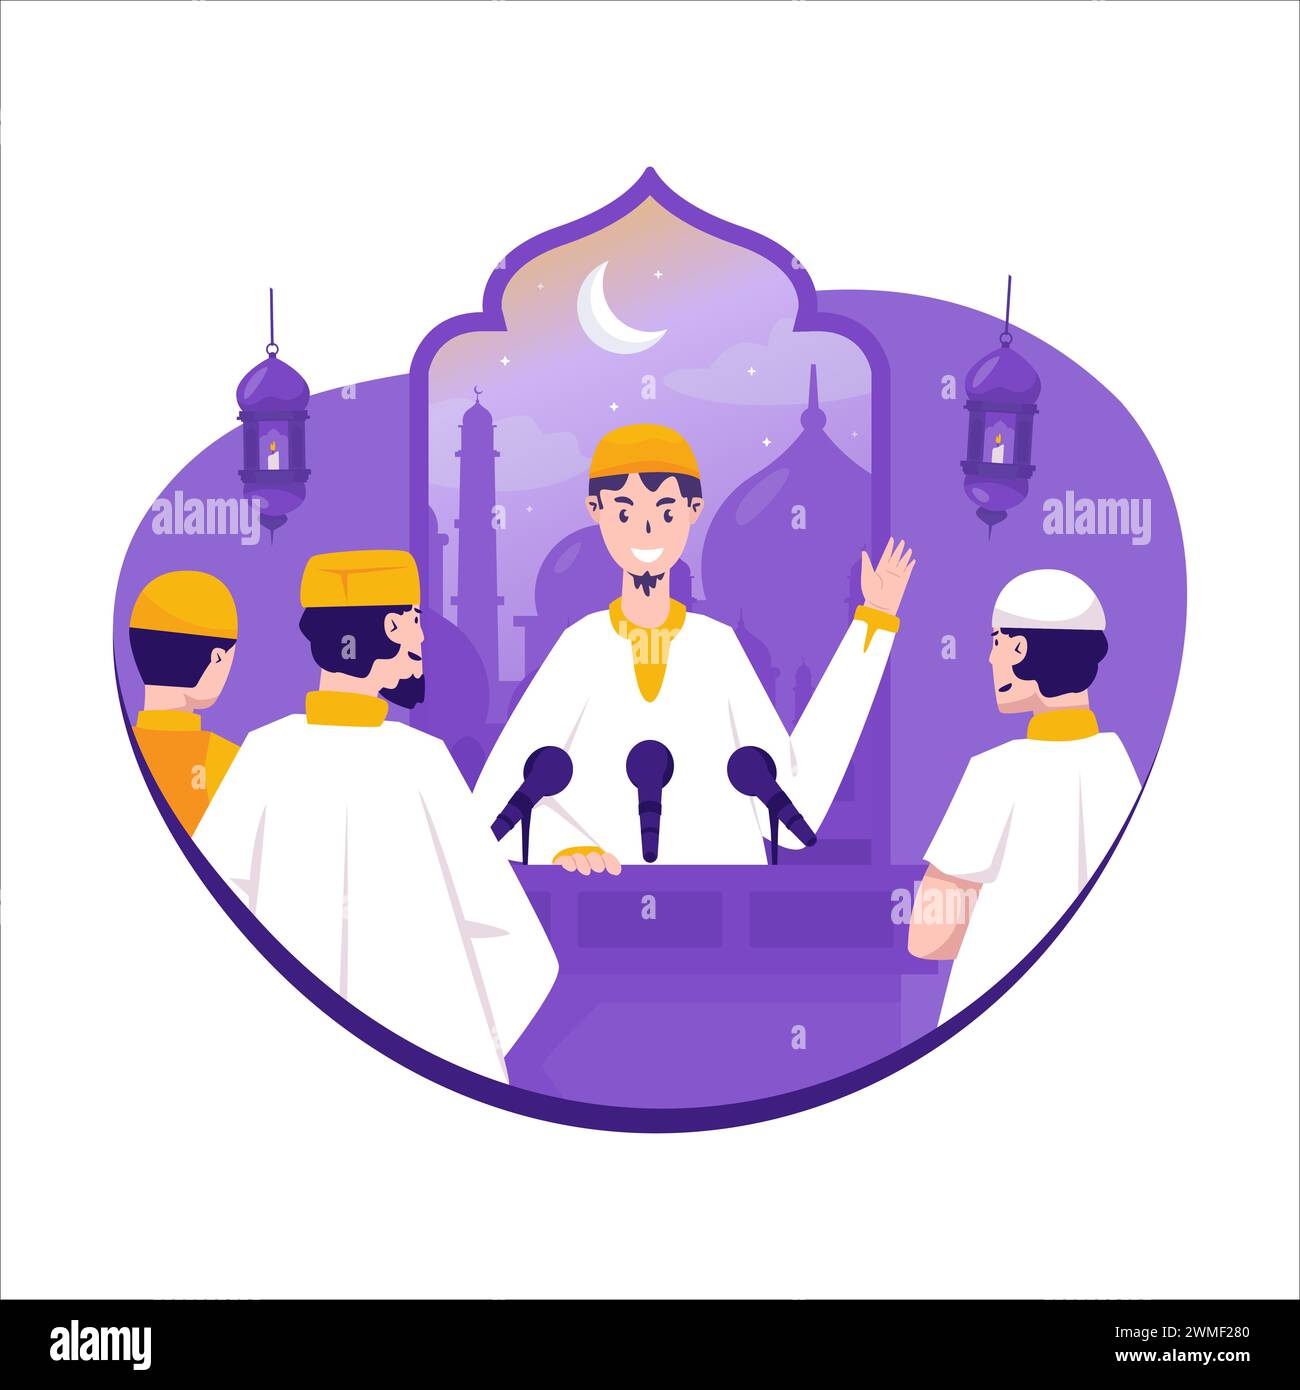 Illustration of a Muslim preaching at a mosque Stock Vector